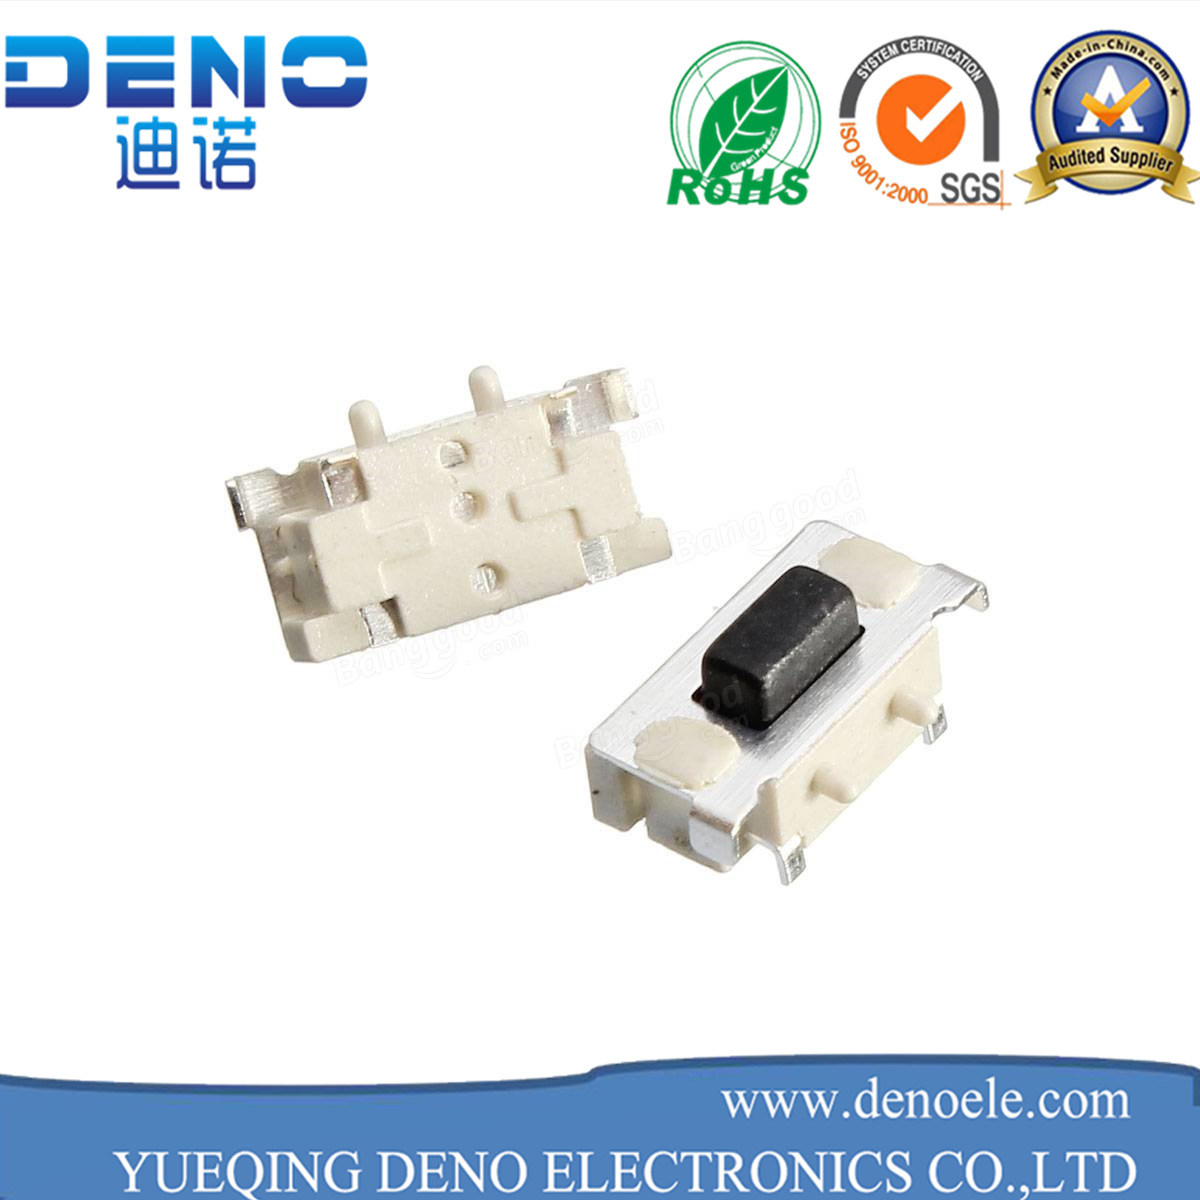 White Insulator RoHS Compliant 12V SMT Type Tactile Switch